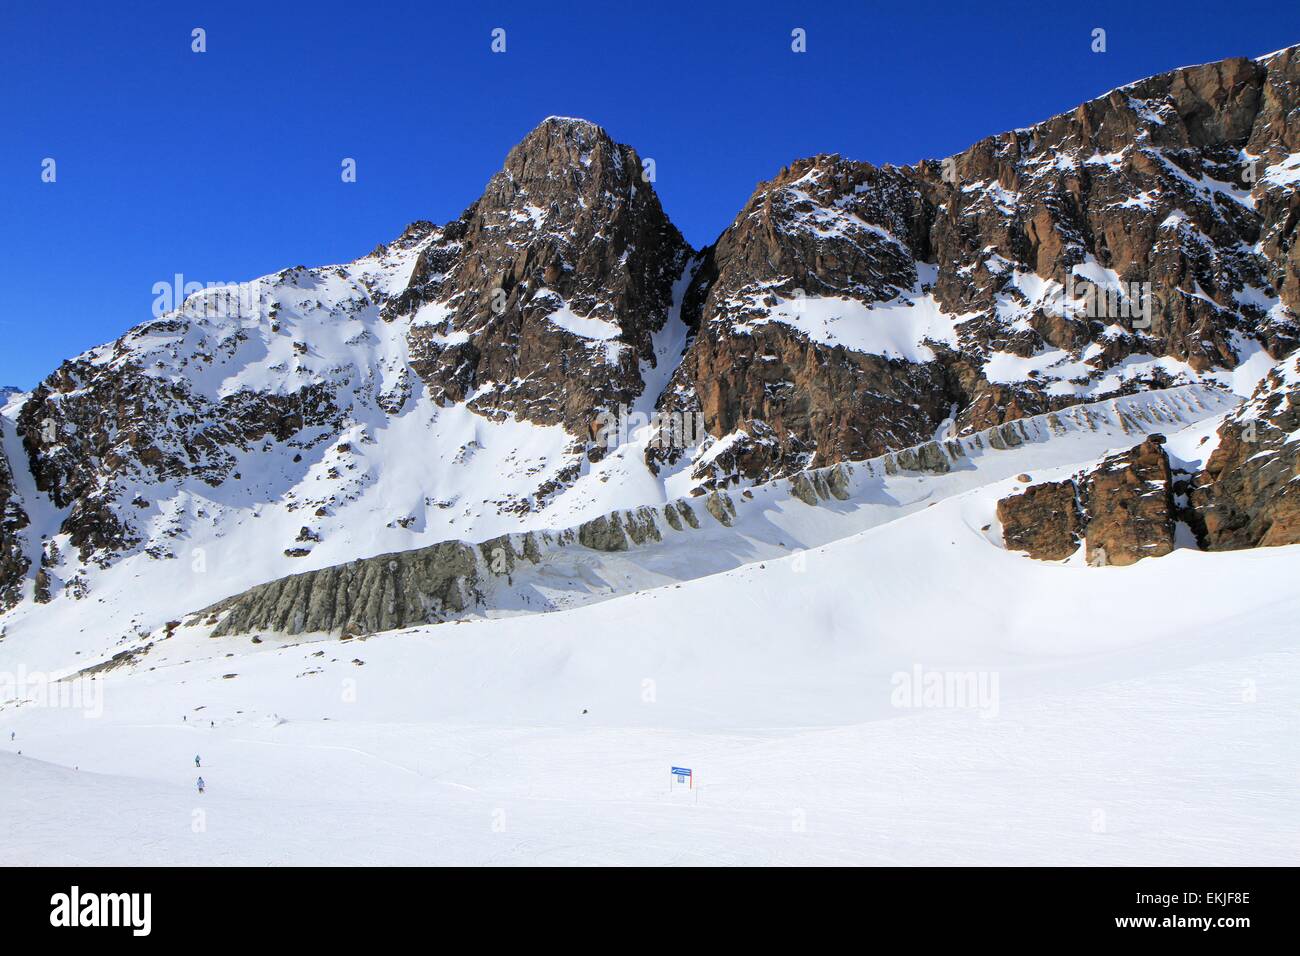 Moraine and mountain view from Saas Grund, Alps, Switzerland Stock Photo